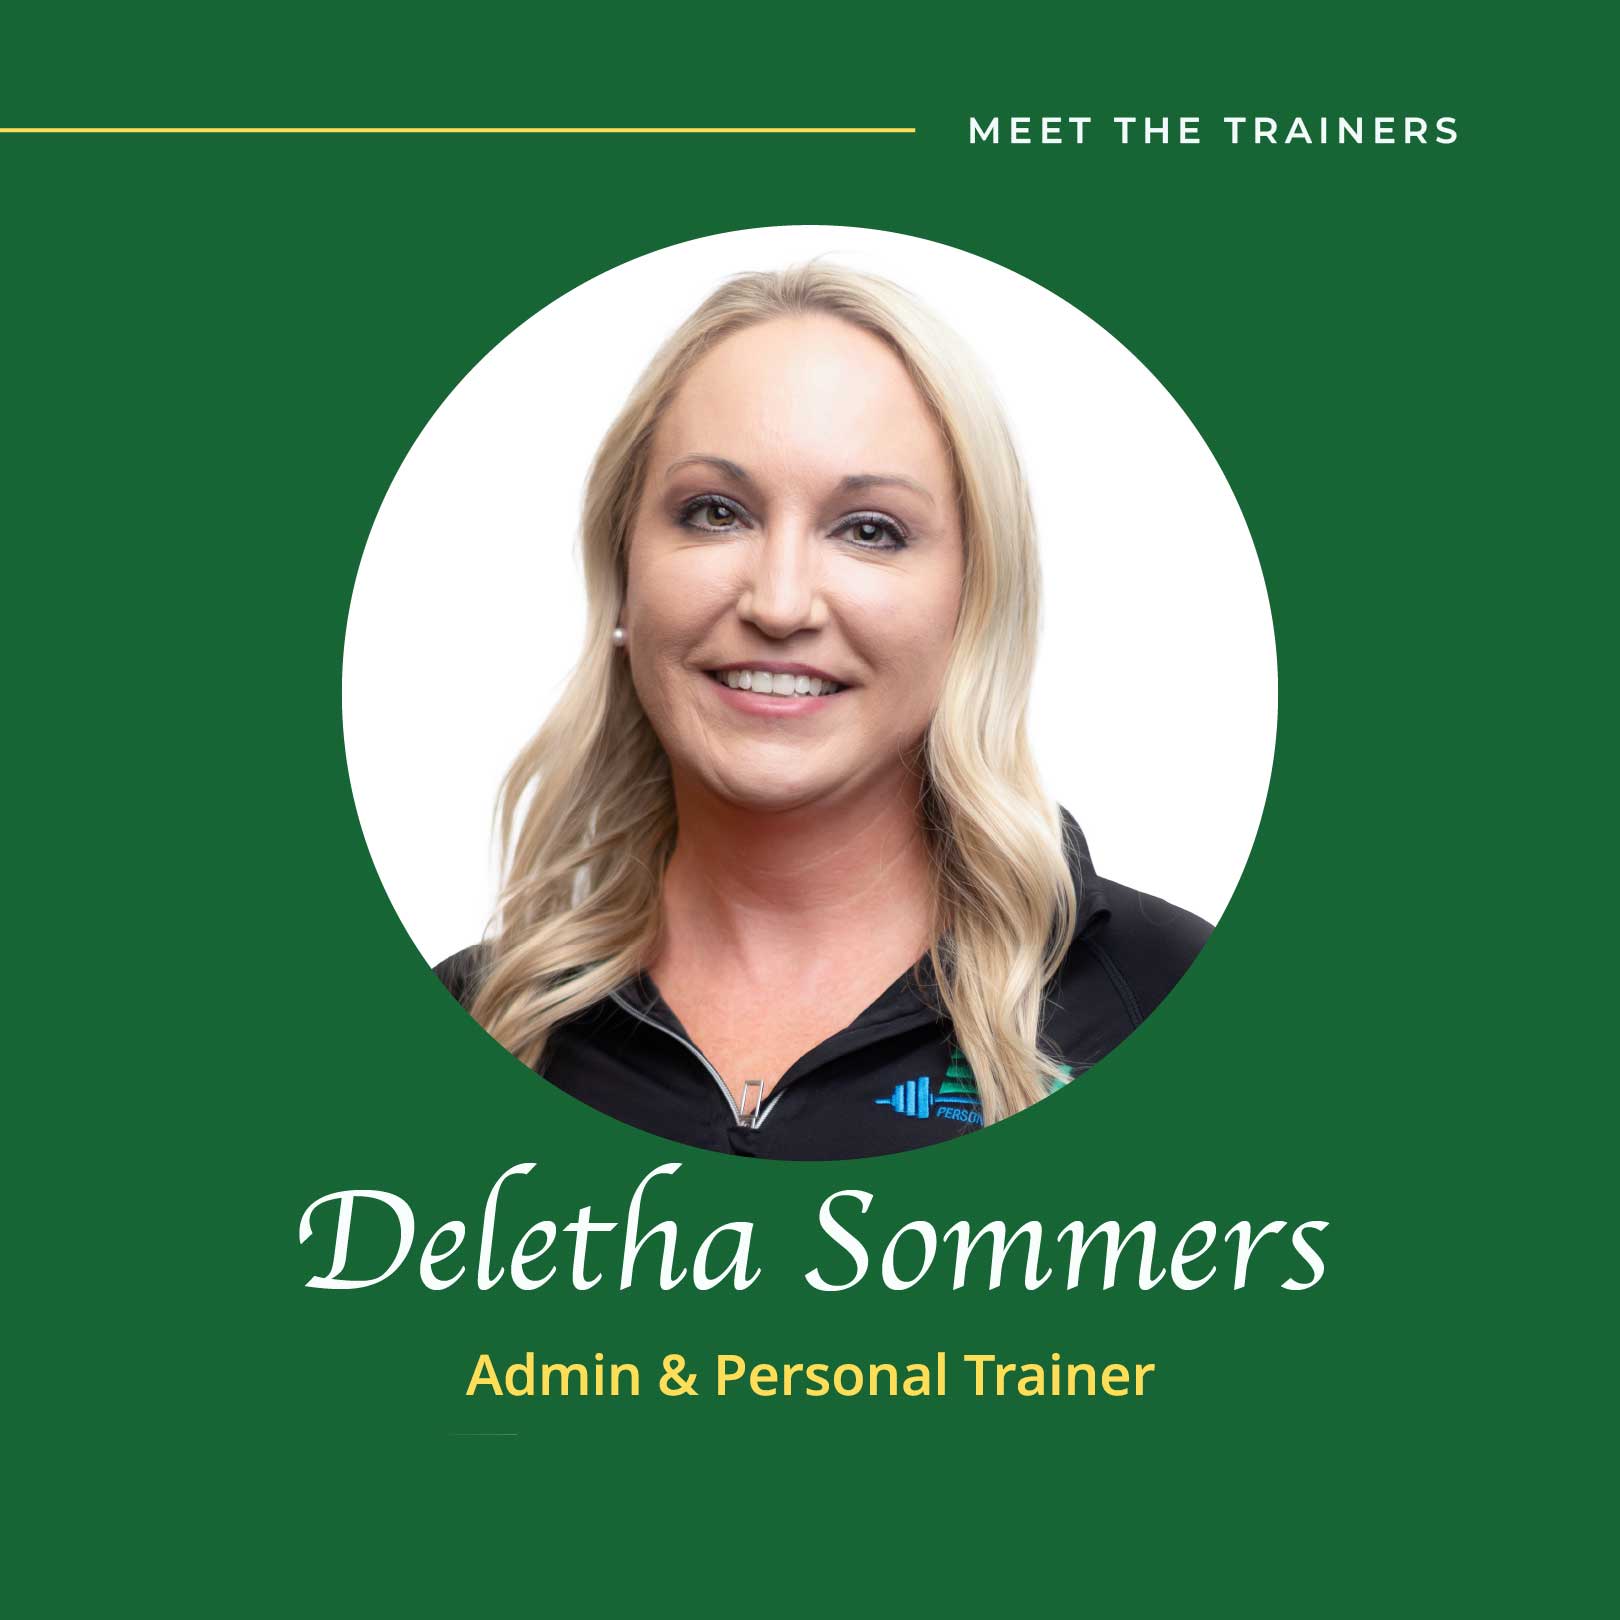 Deletha Sommers